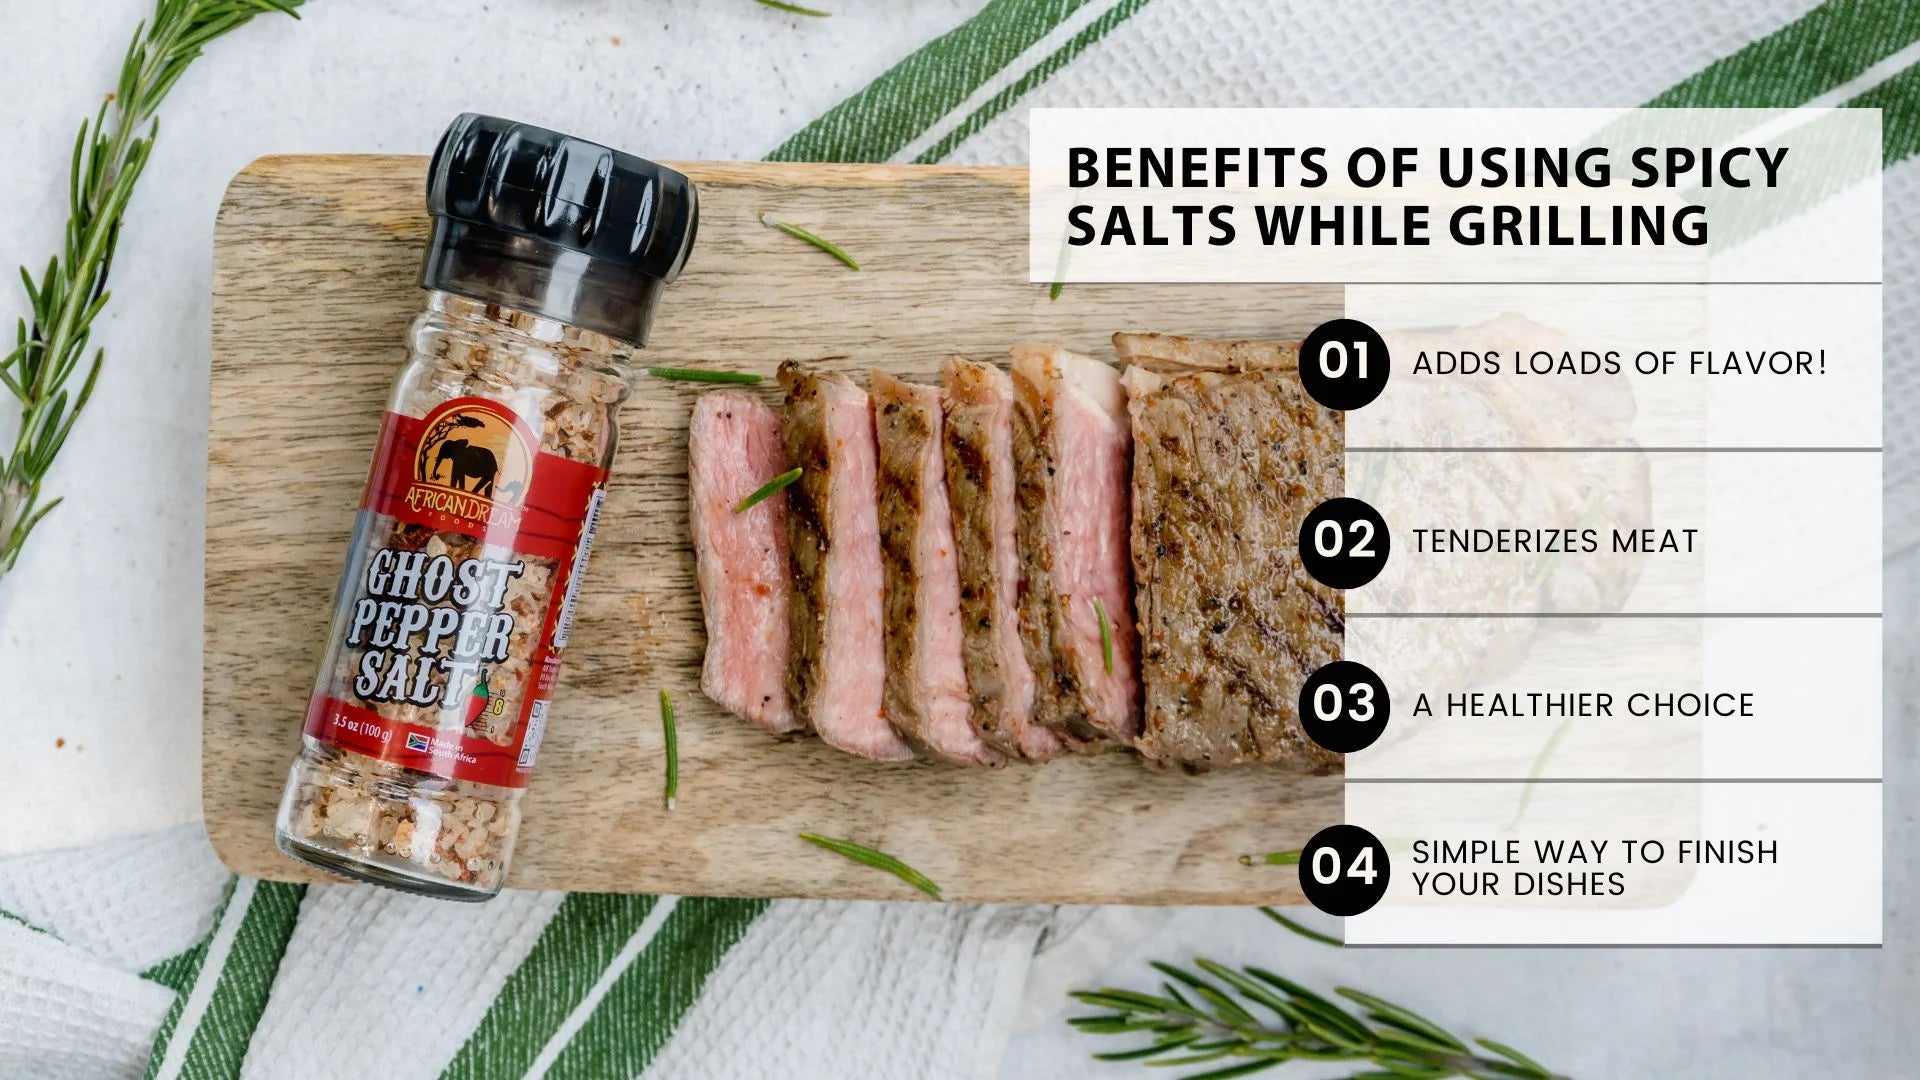 spicy salts and grilling